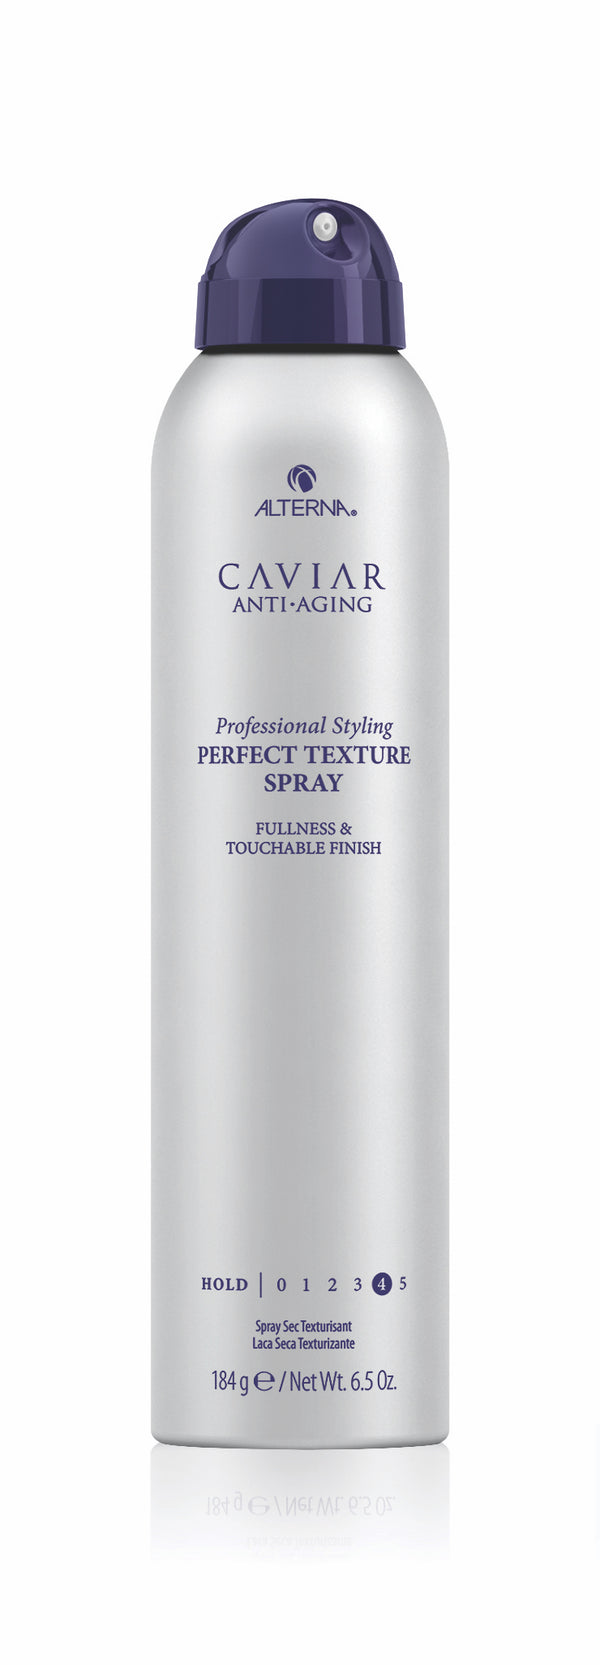 CAVIAR ANTI-AGING PROFESSIONAL STYLING PERFECT TEXTURE SPRAY - Front Door Beauty